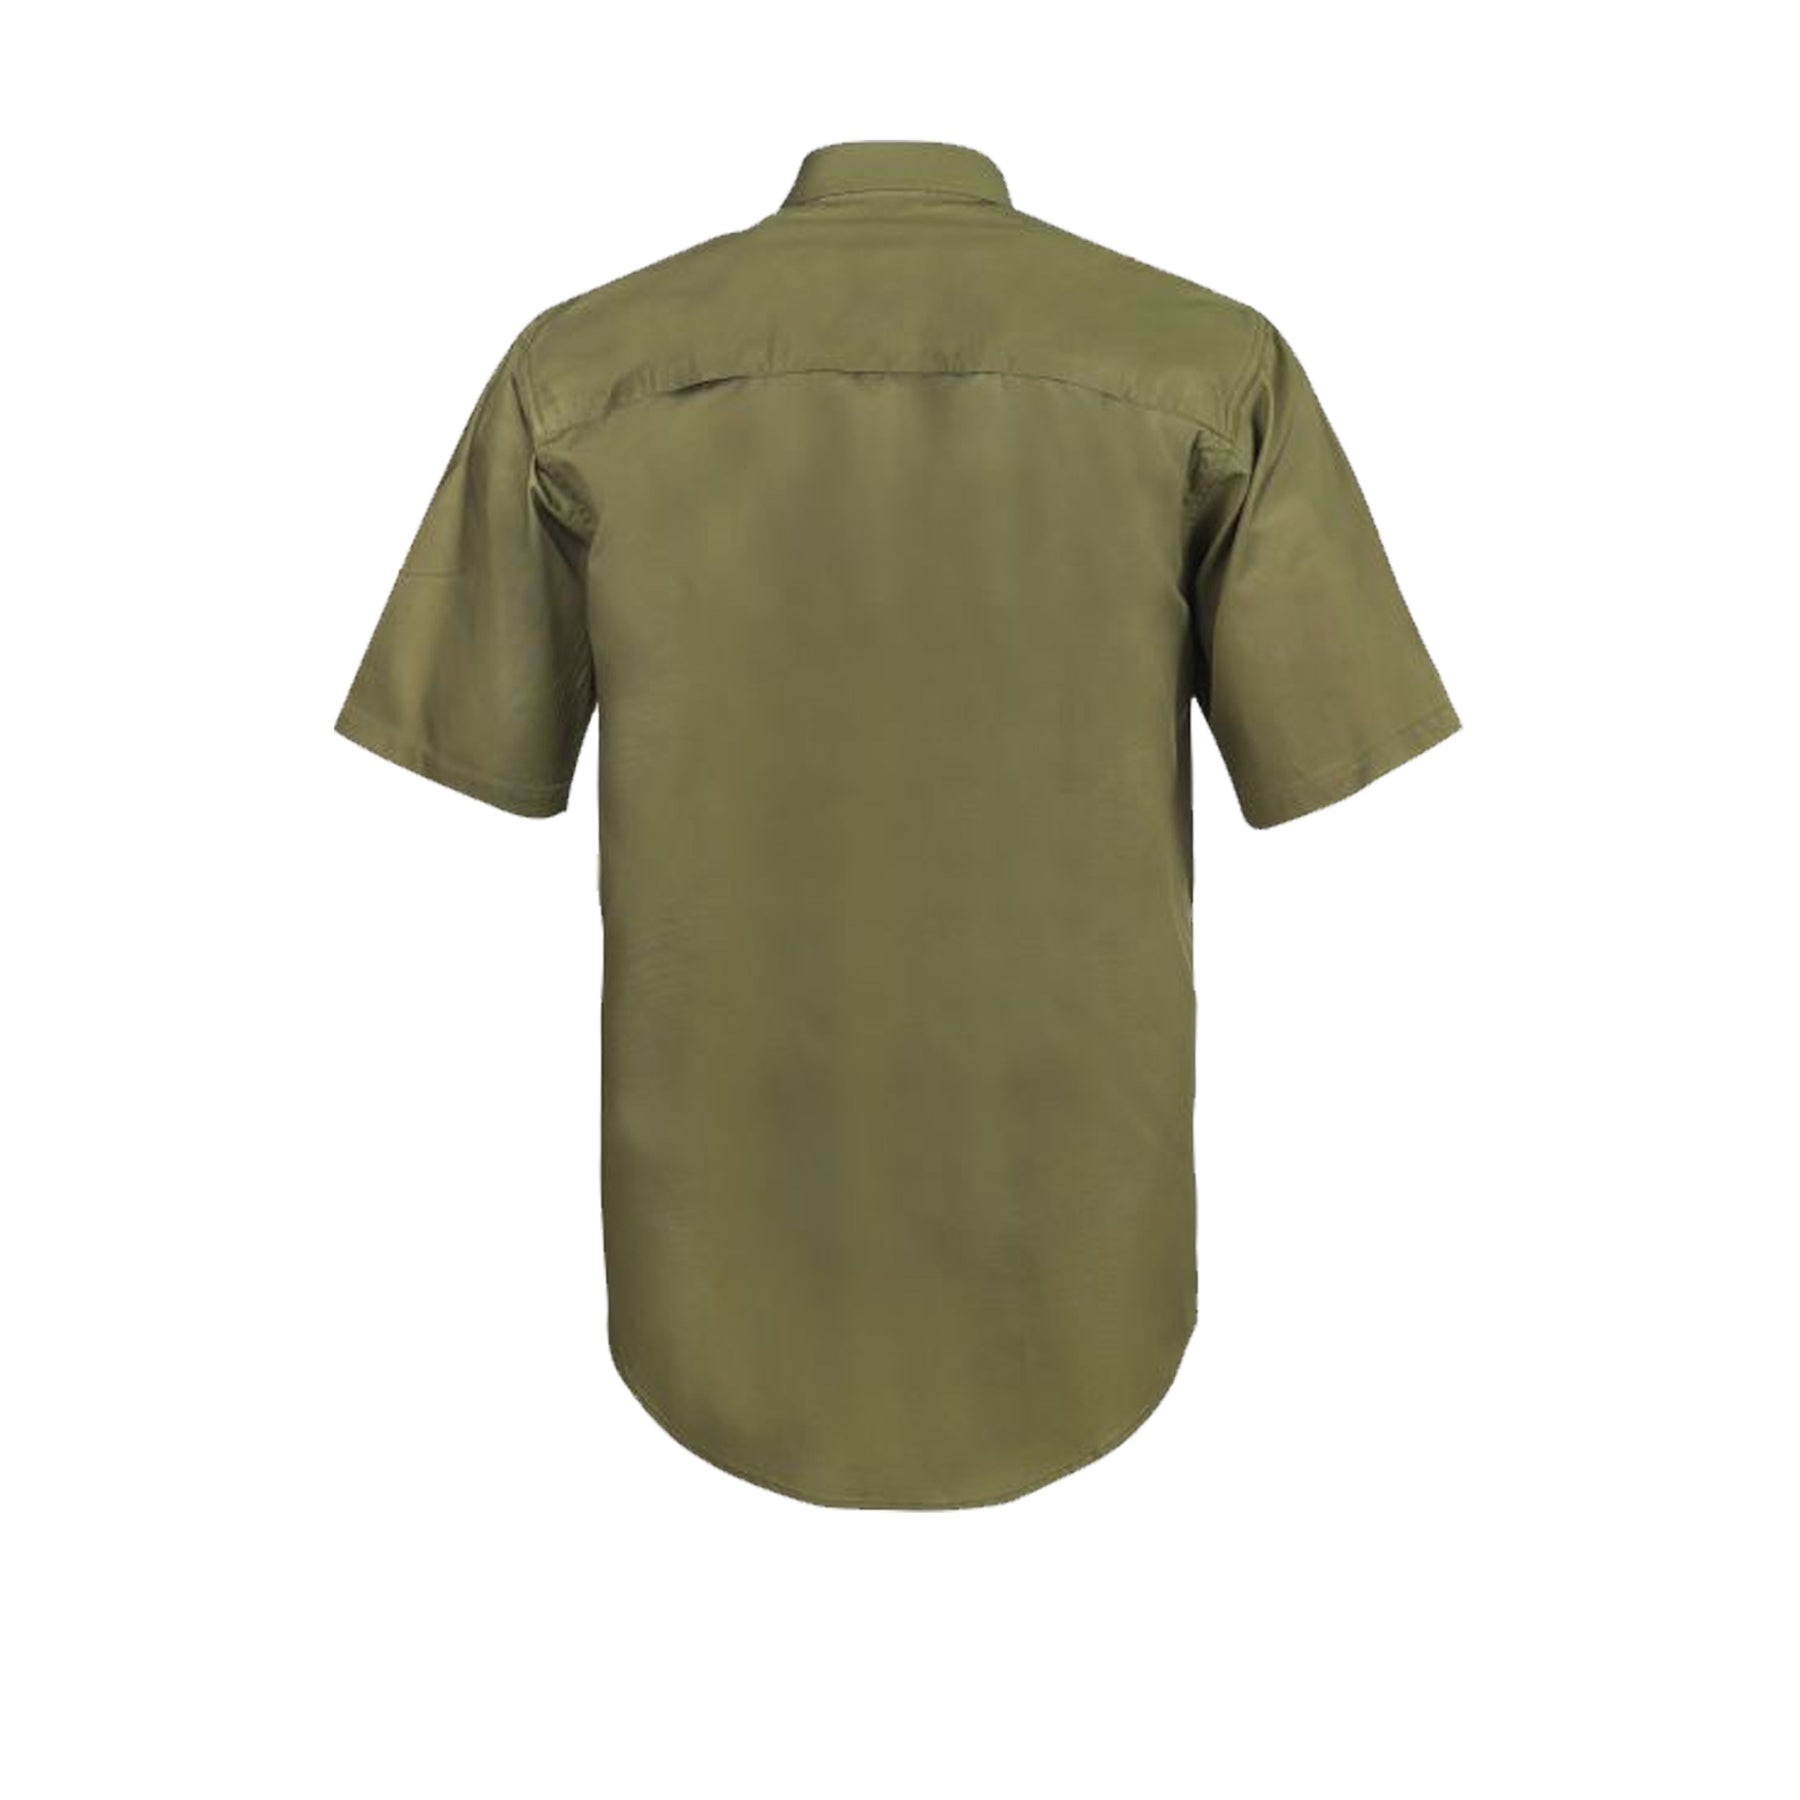 back of lightweight short sleeve vented cotton drill shirt in khaki